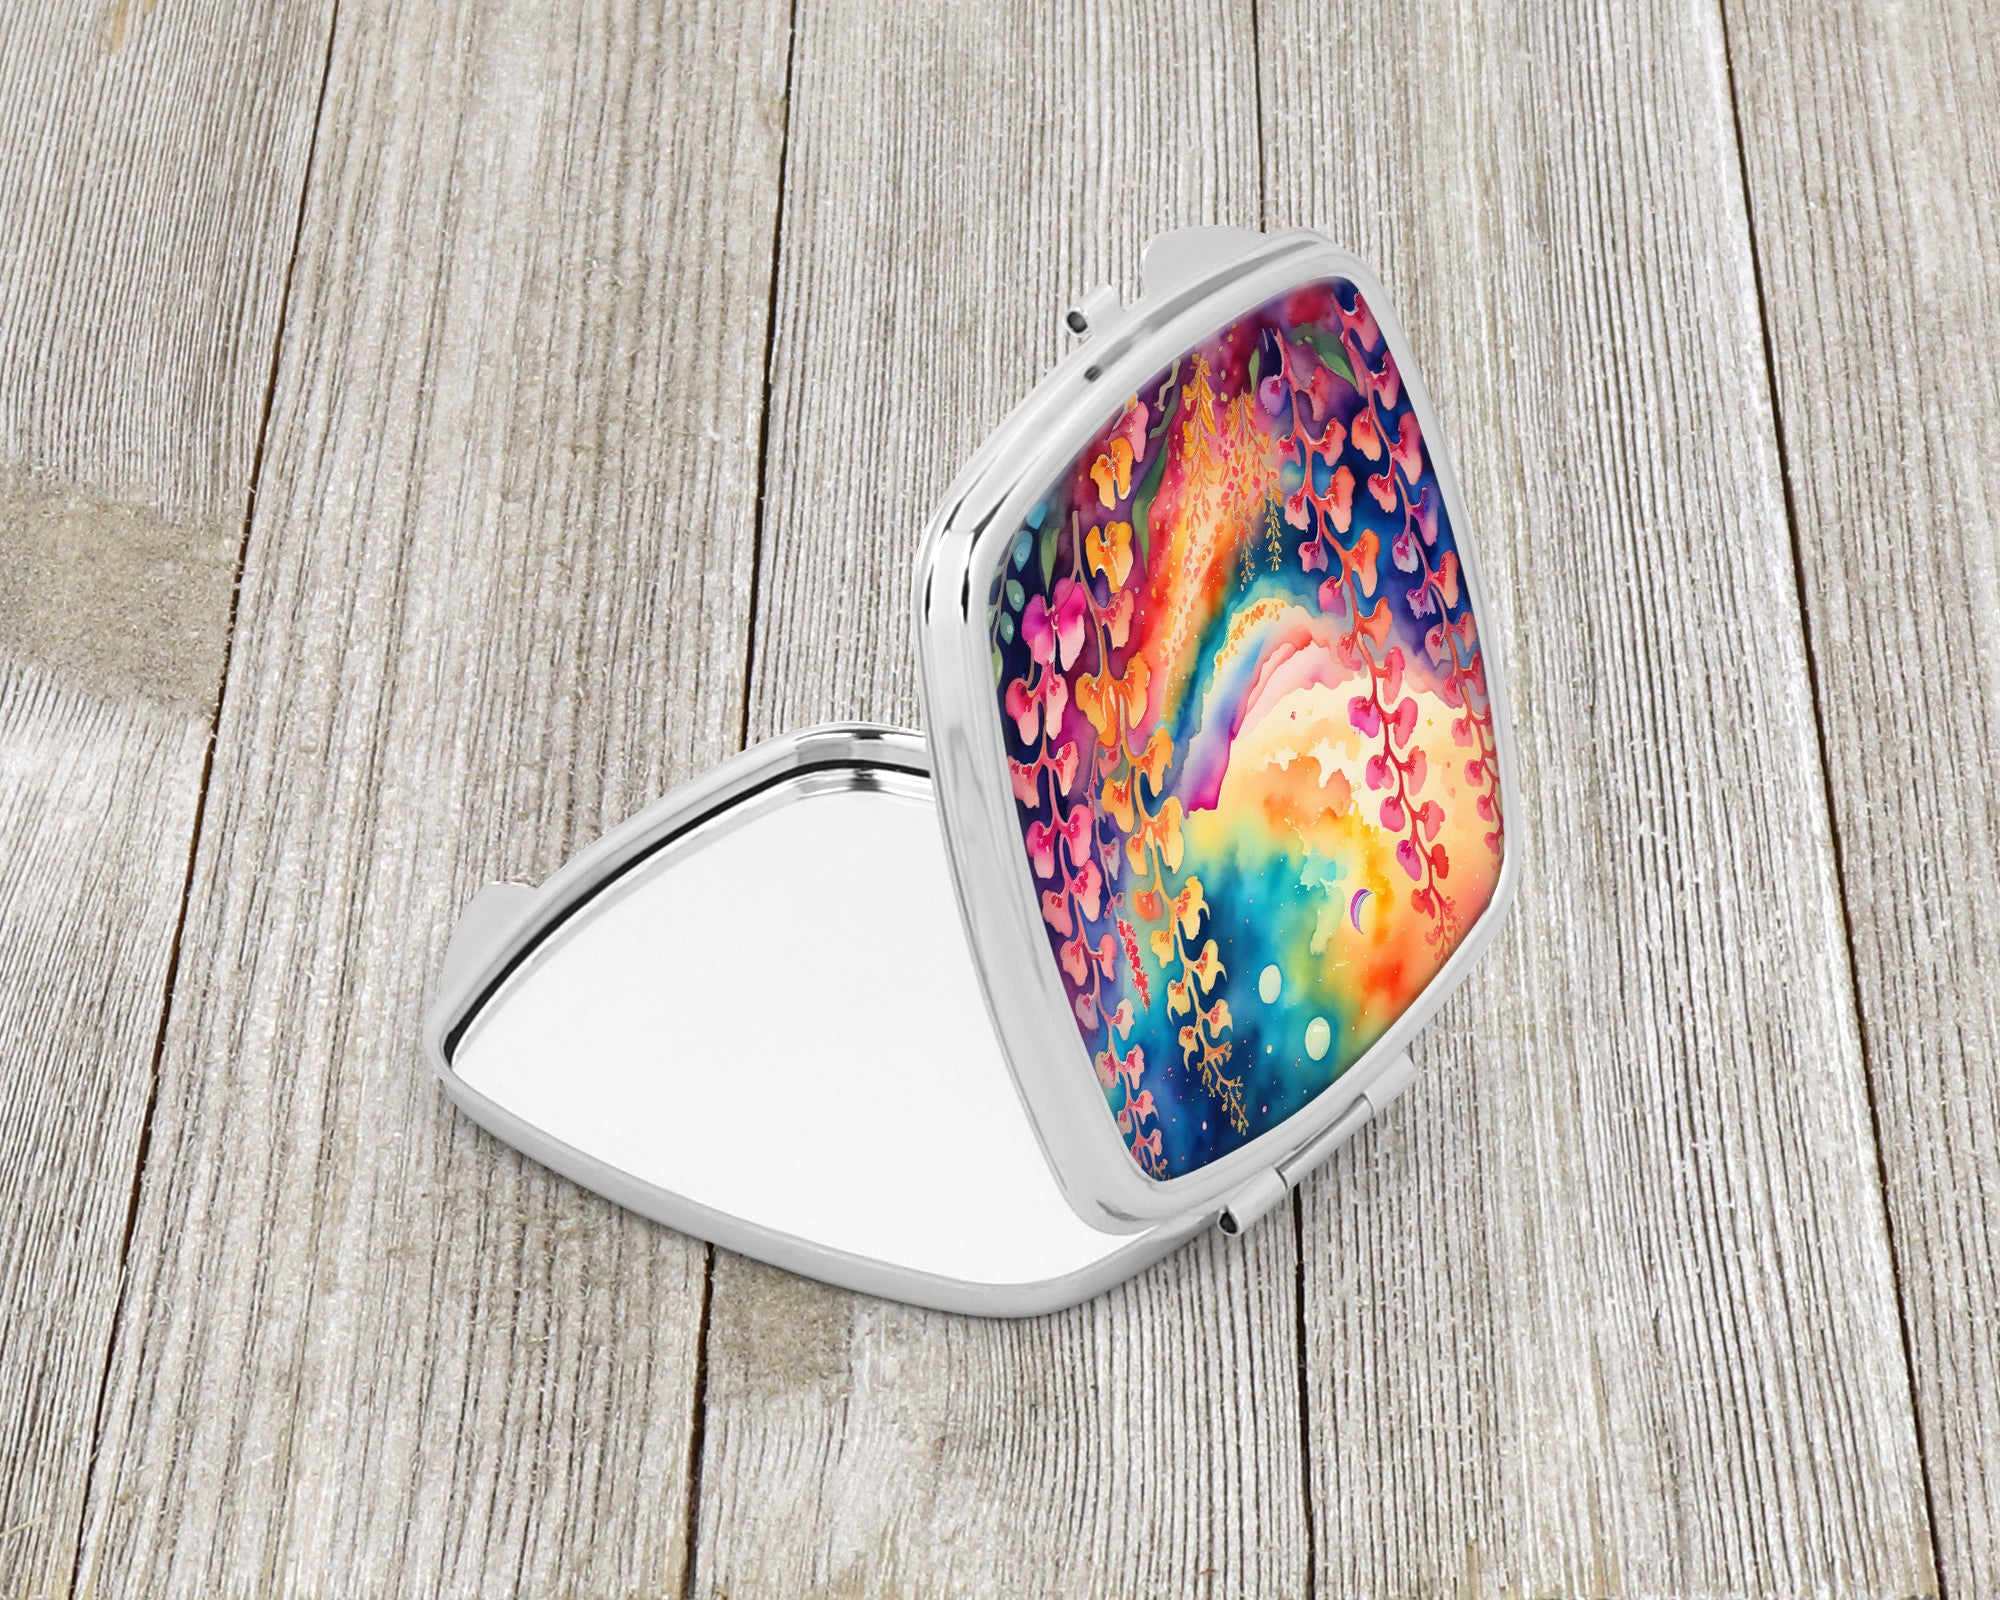 Buy this Colorful Snapdragon Compact Mirror